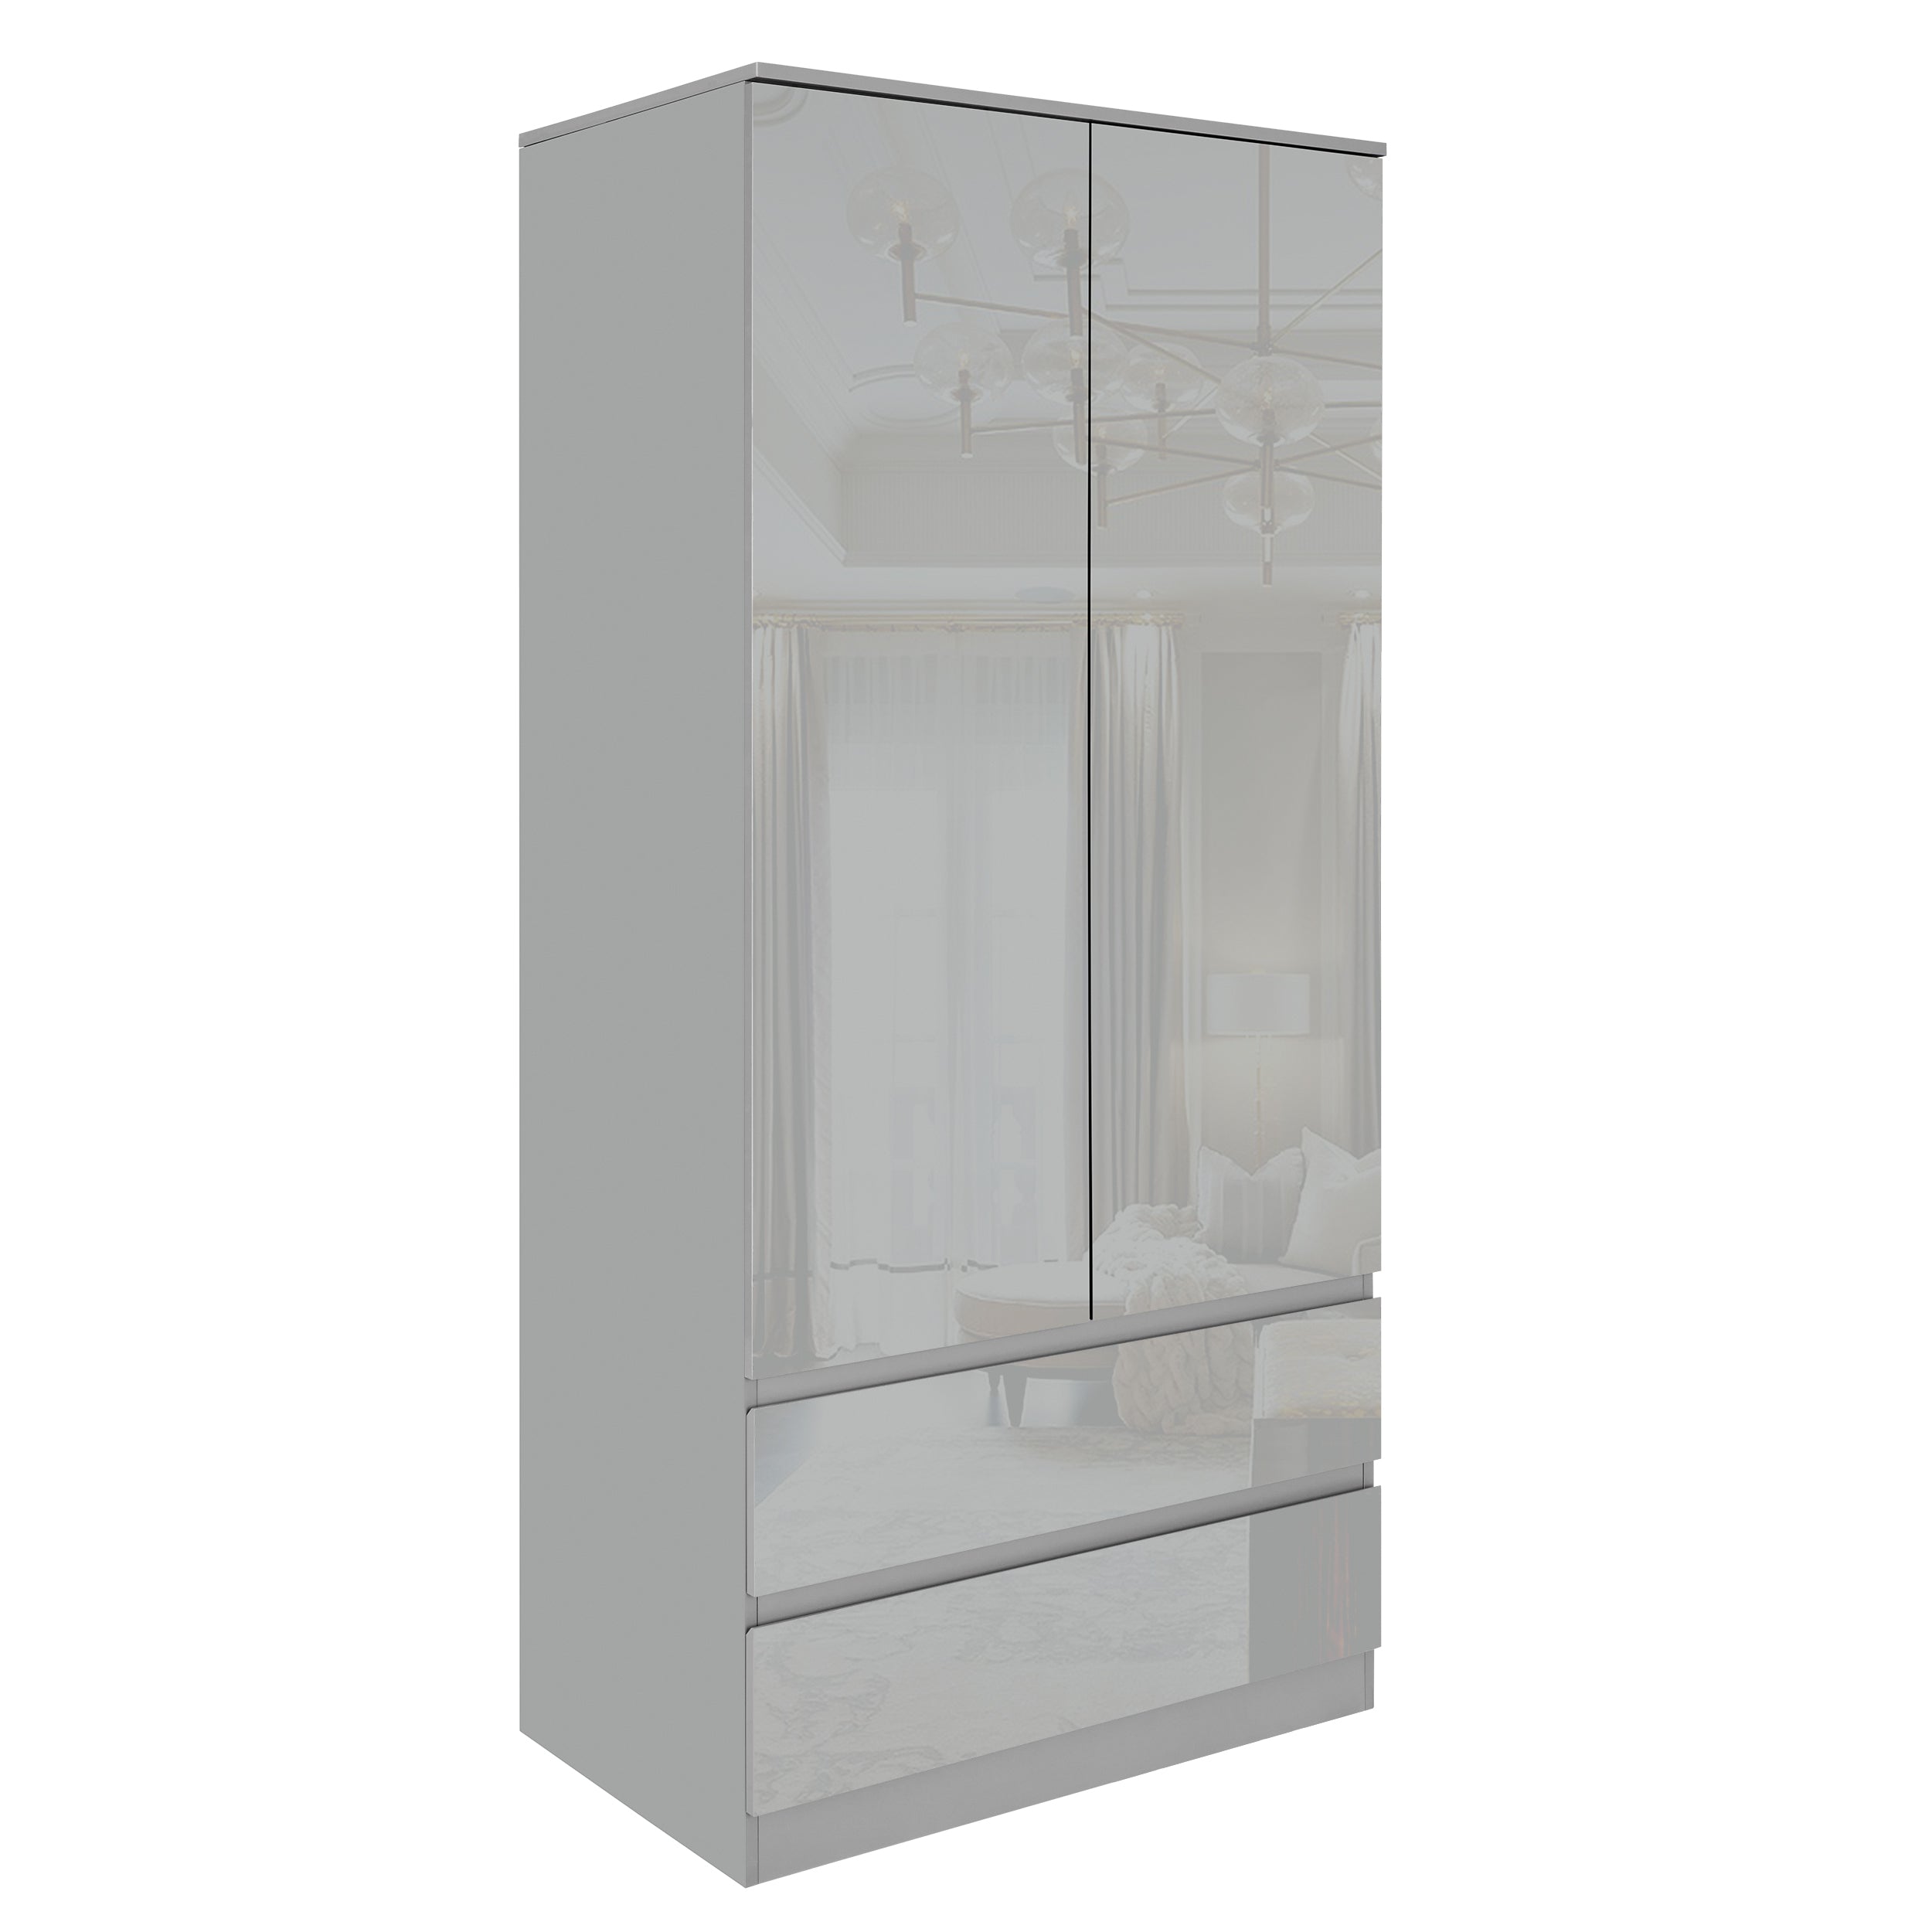 Blisswood High Gloss 2 Door Wardrobe and 8 Drawer Chest Bedroom Set